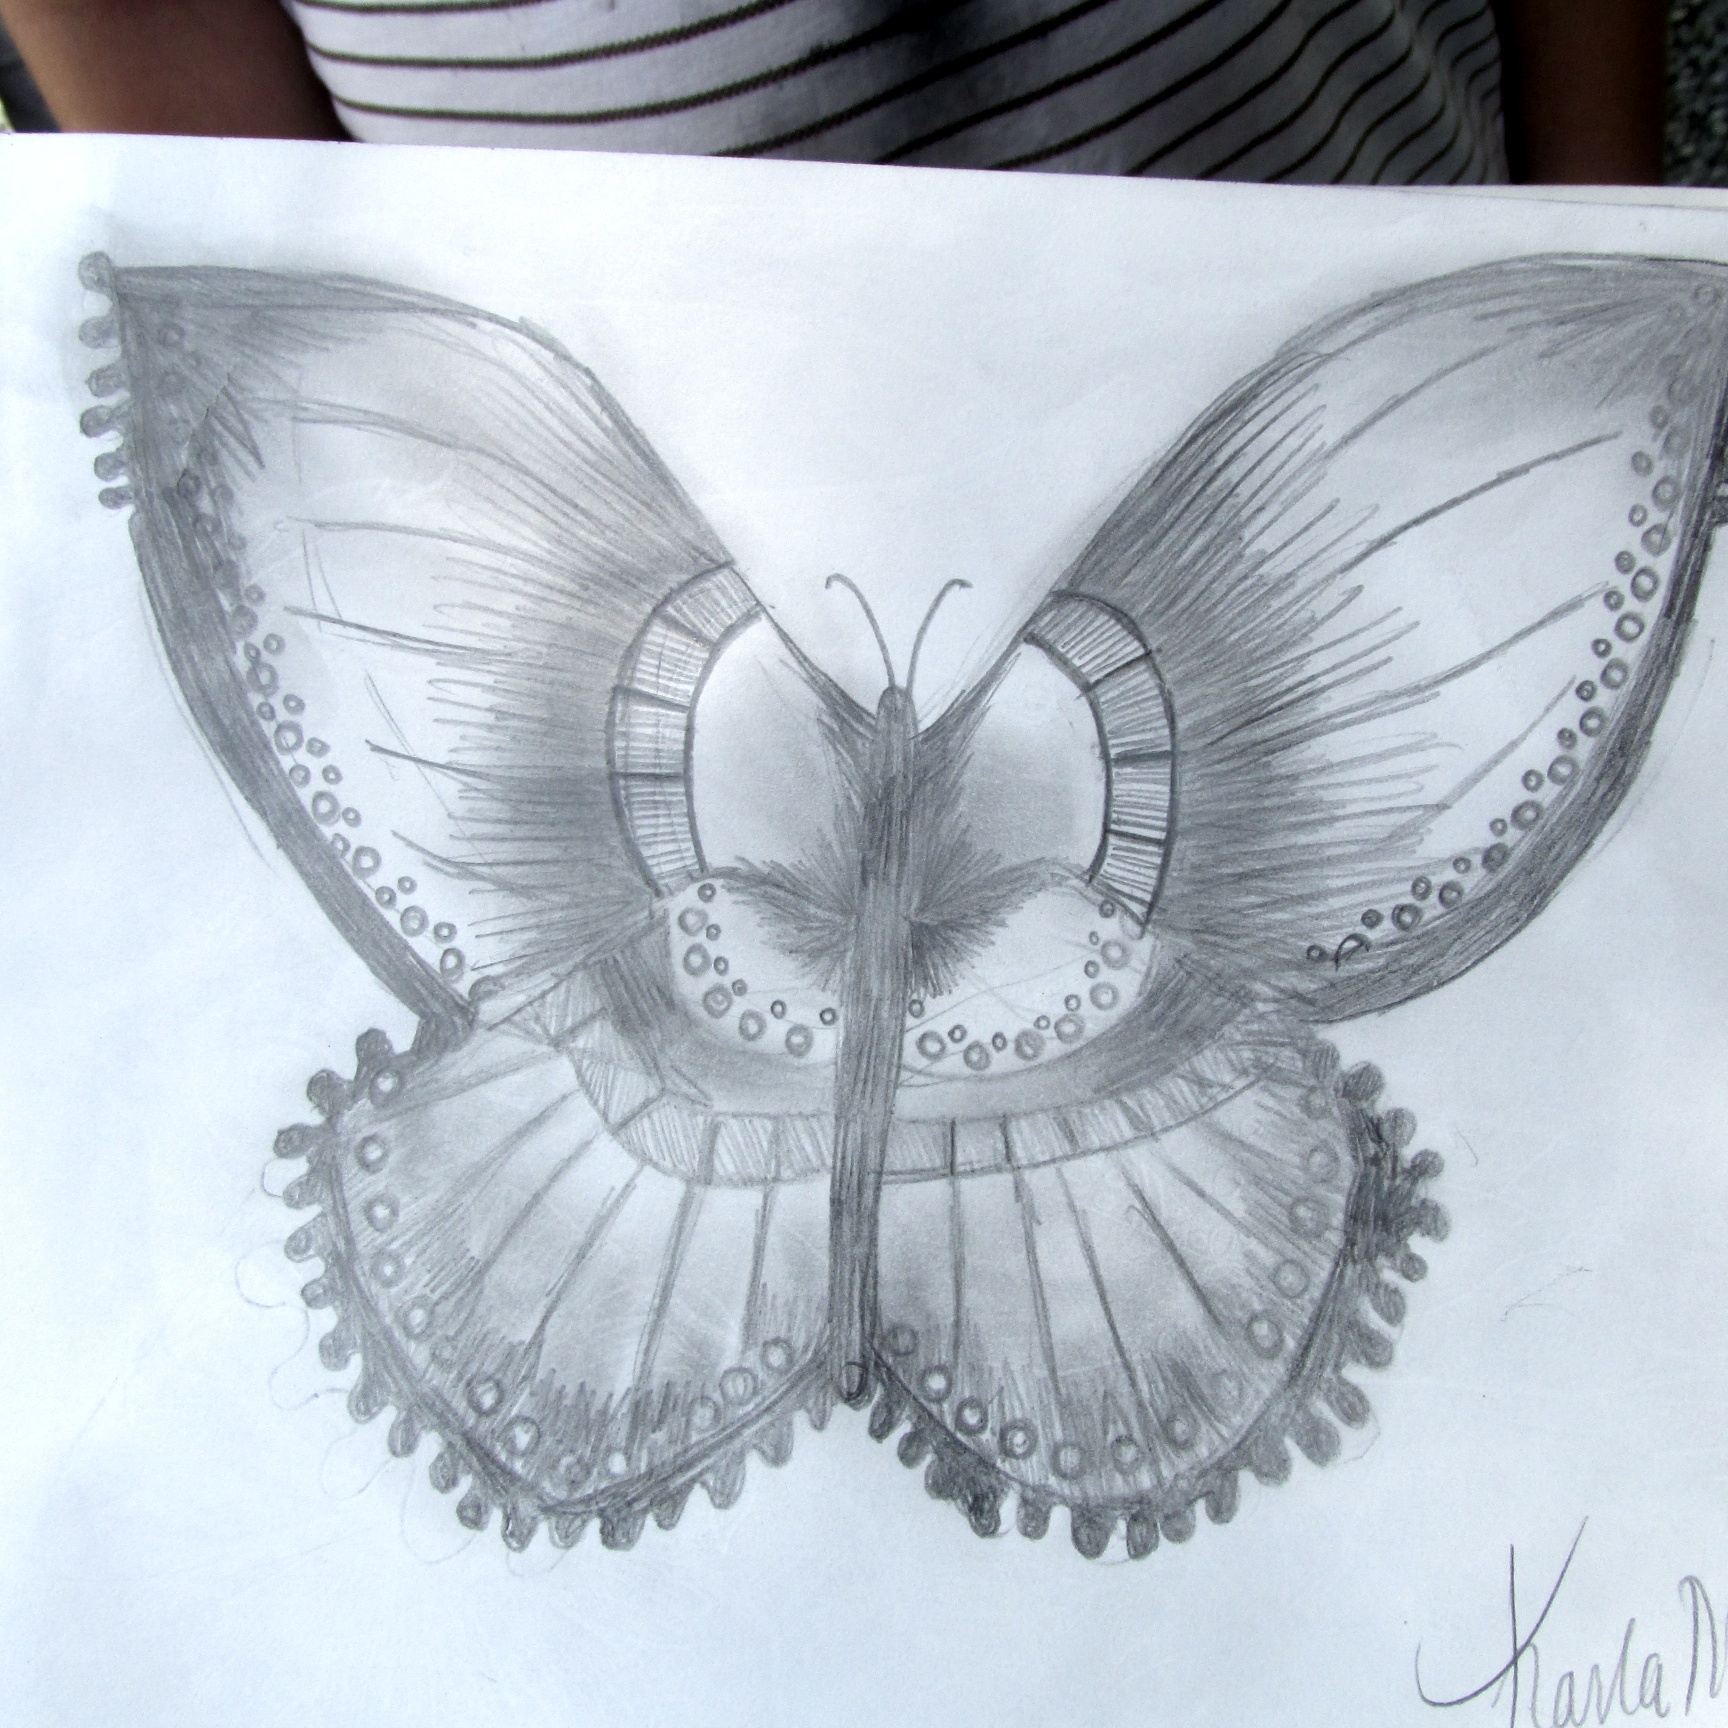 Check out these beautiful nature drawings a young girl was sketching ...